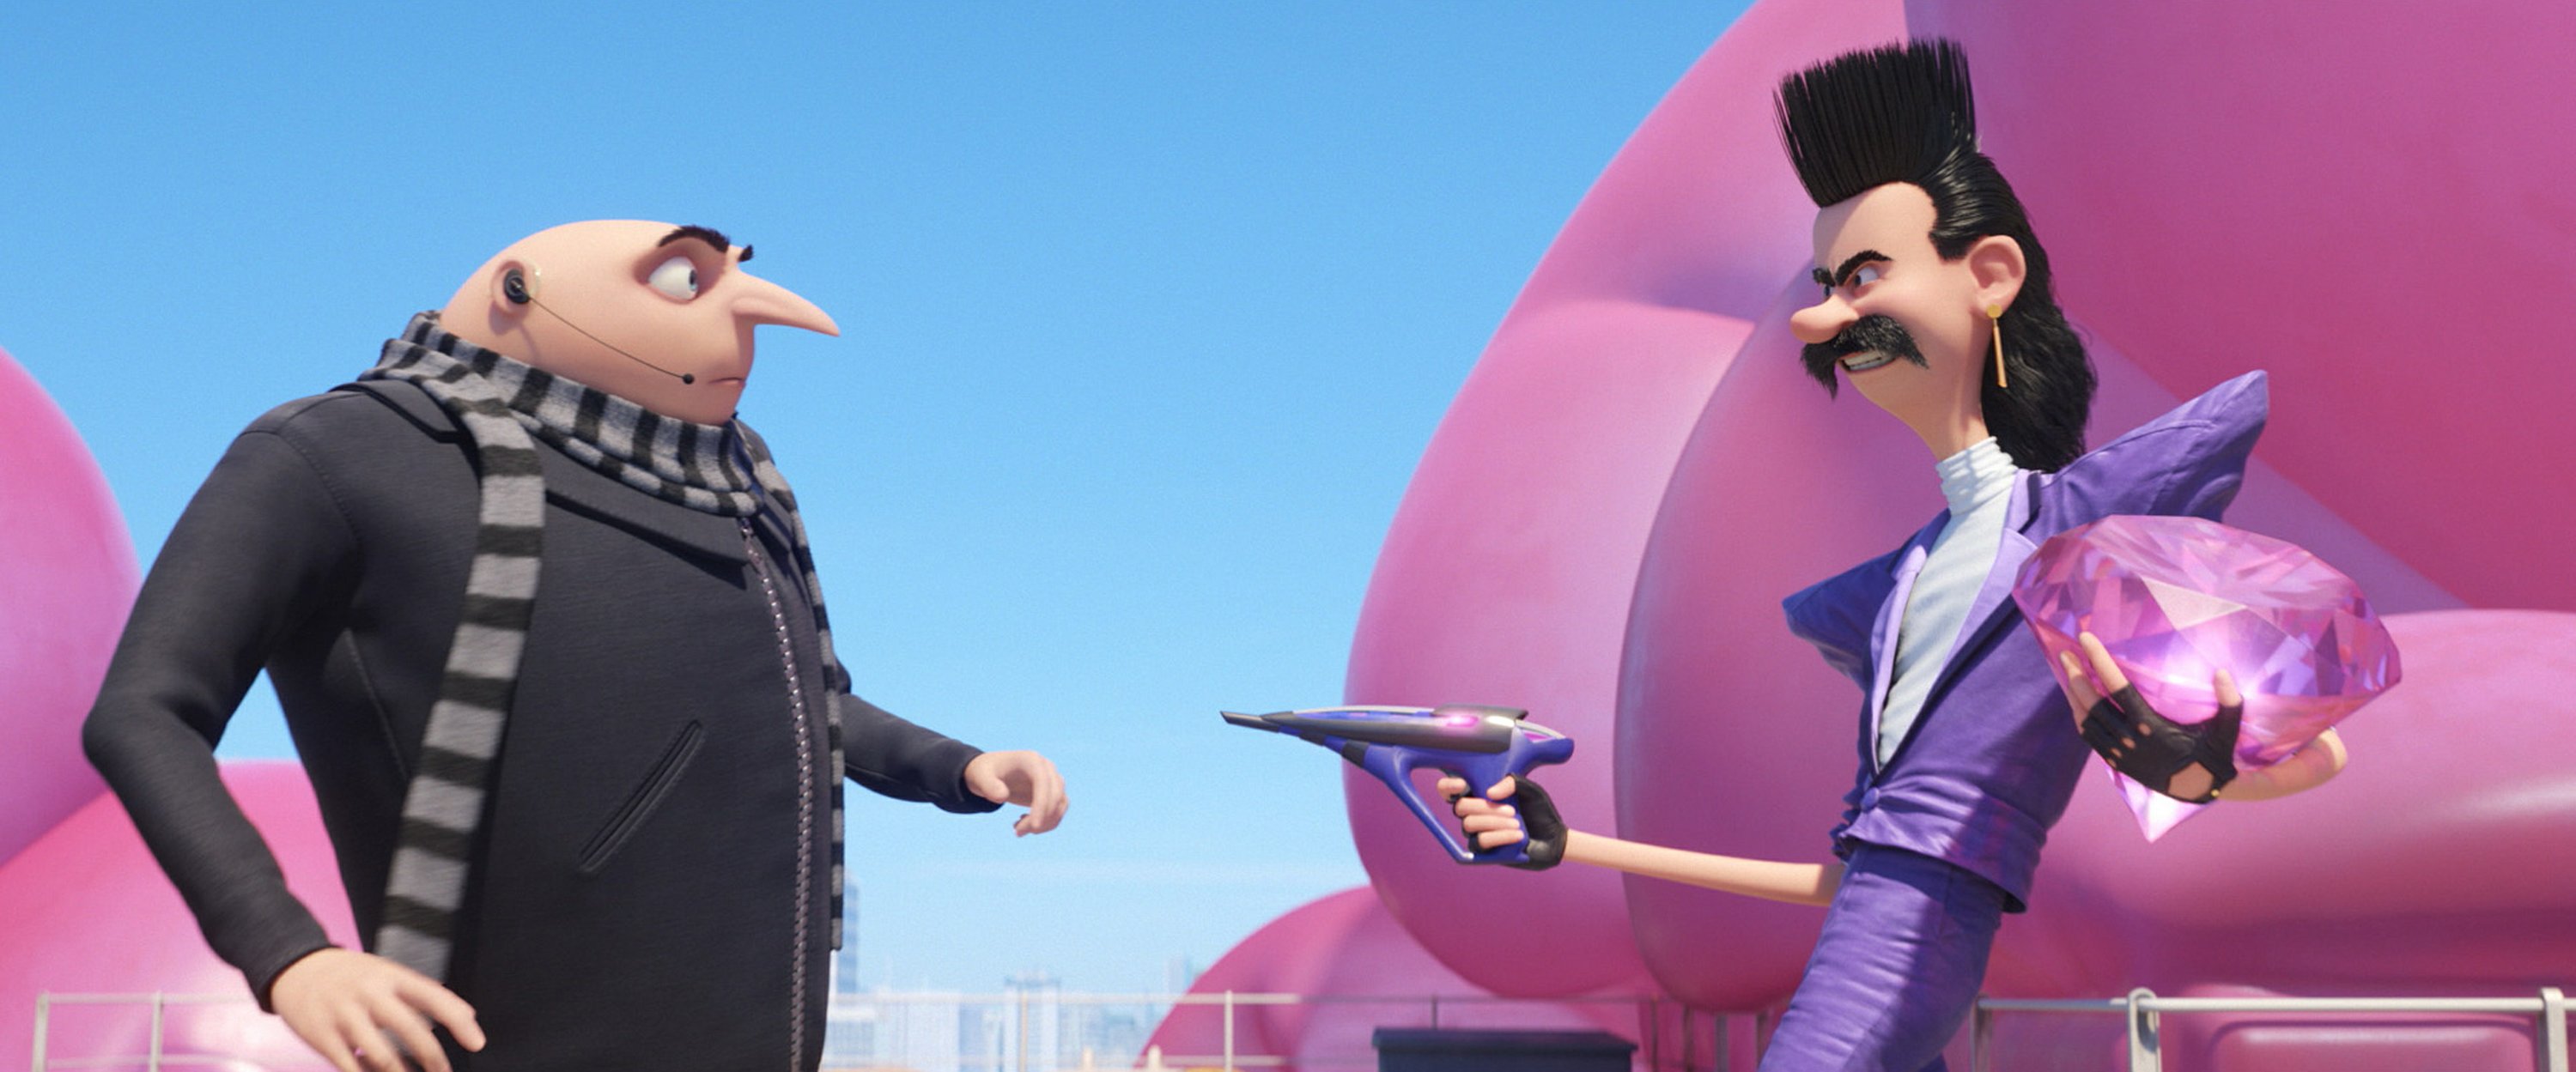 Review More Carell But Fewer Ideas In Despicable Me 3